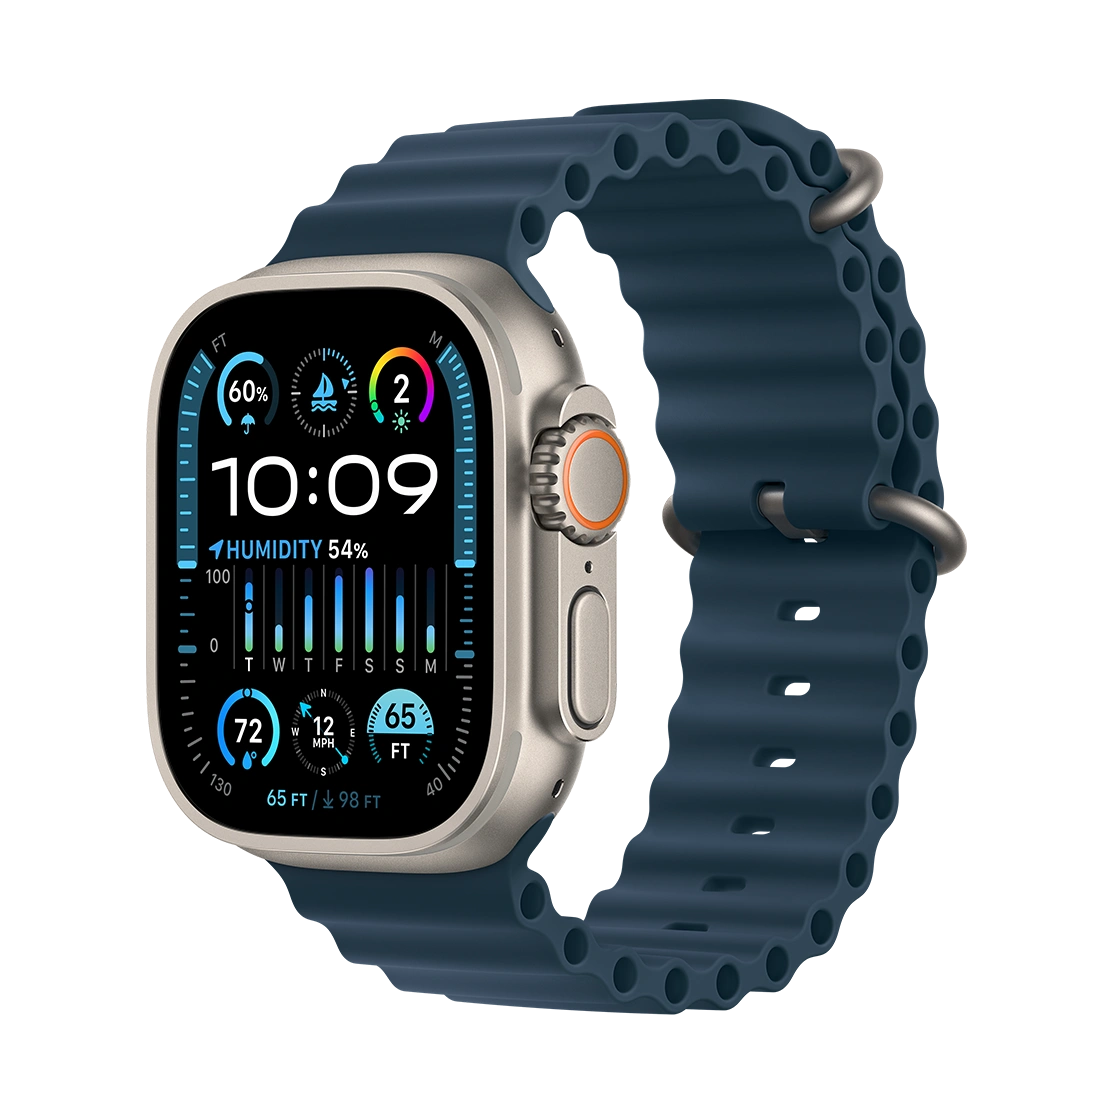 Apple Watch Ultra 2 Titanium Case with Blue Ocean Band